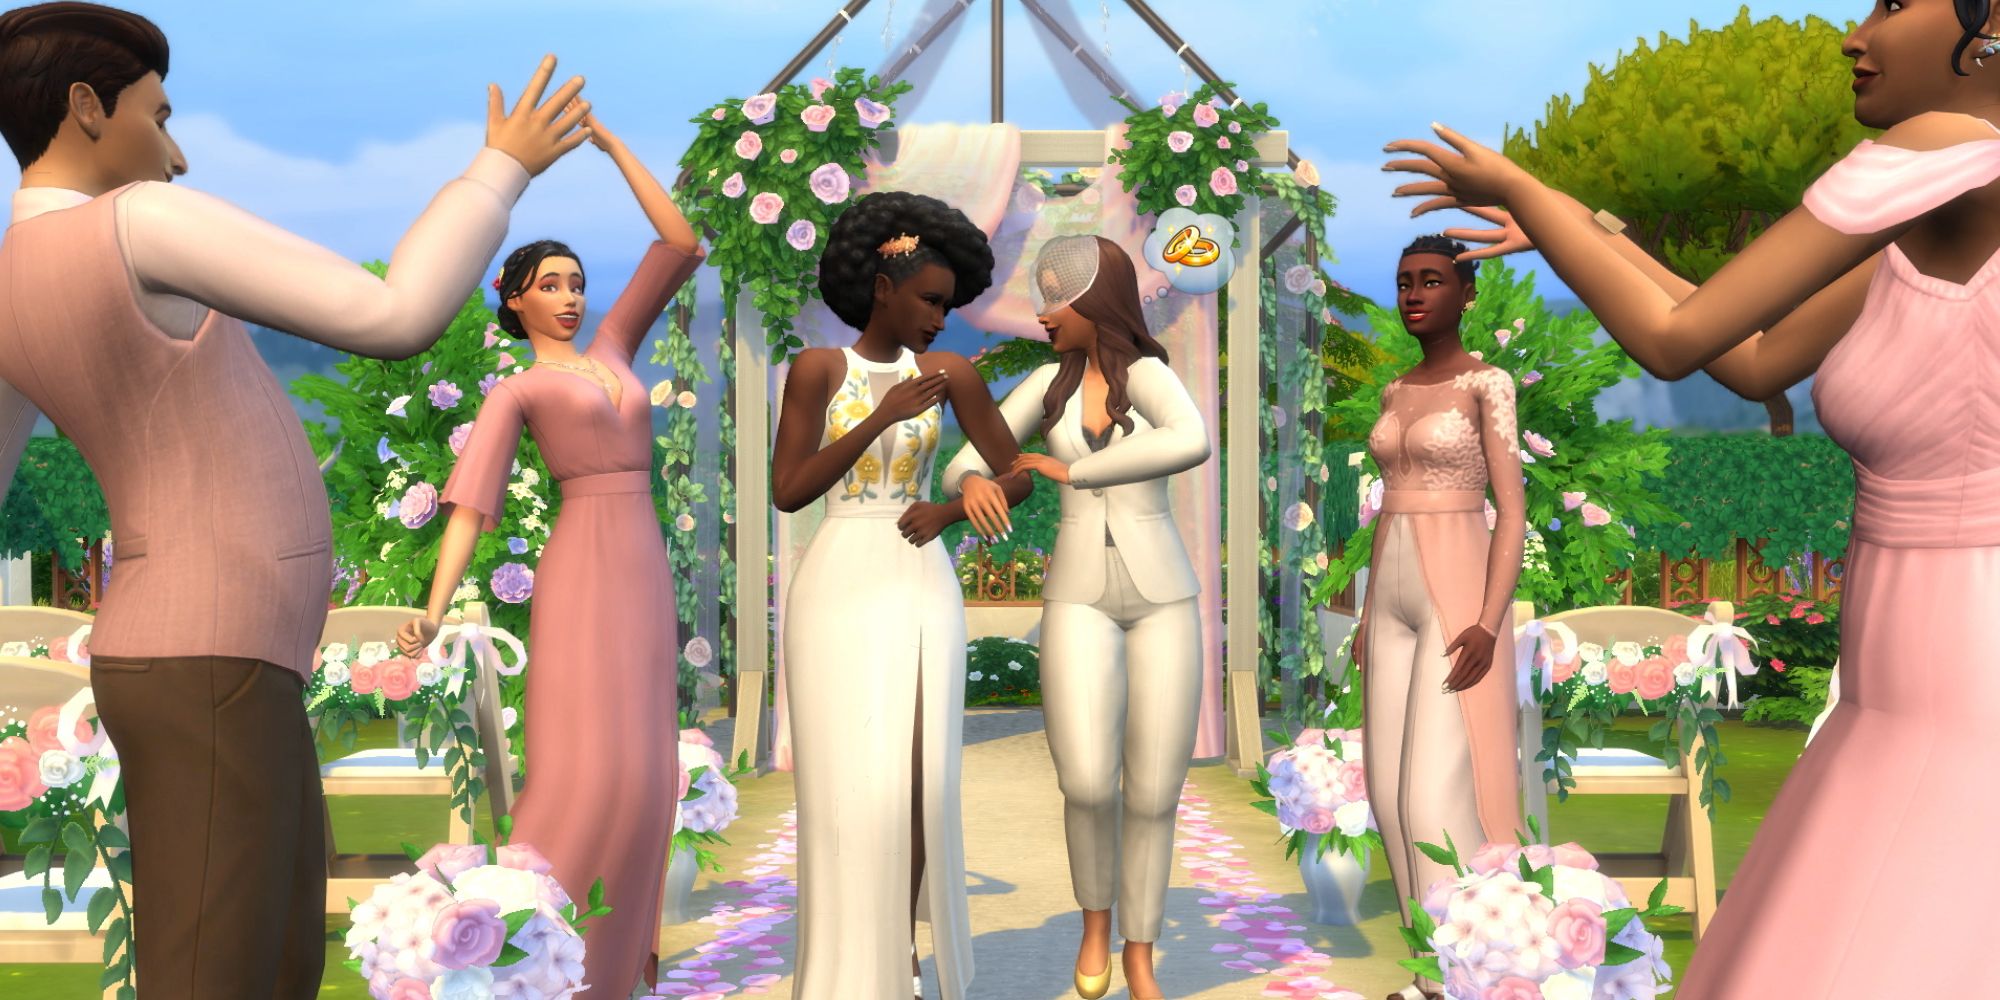 Sims 4 wedding dom and cam walking down ailse